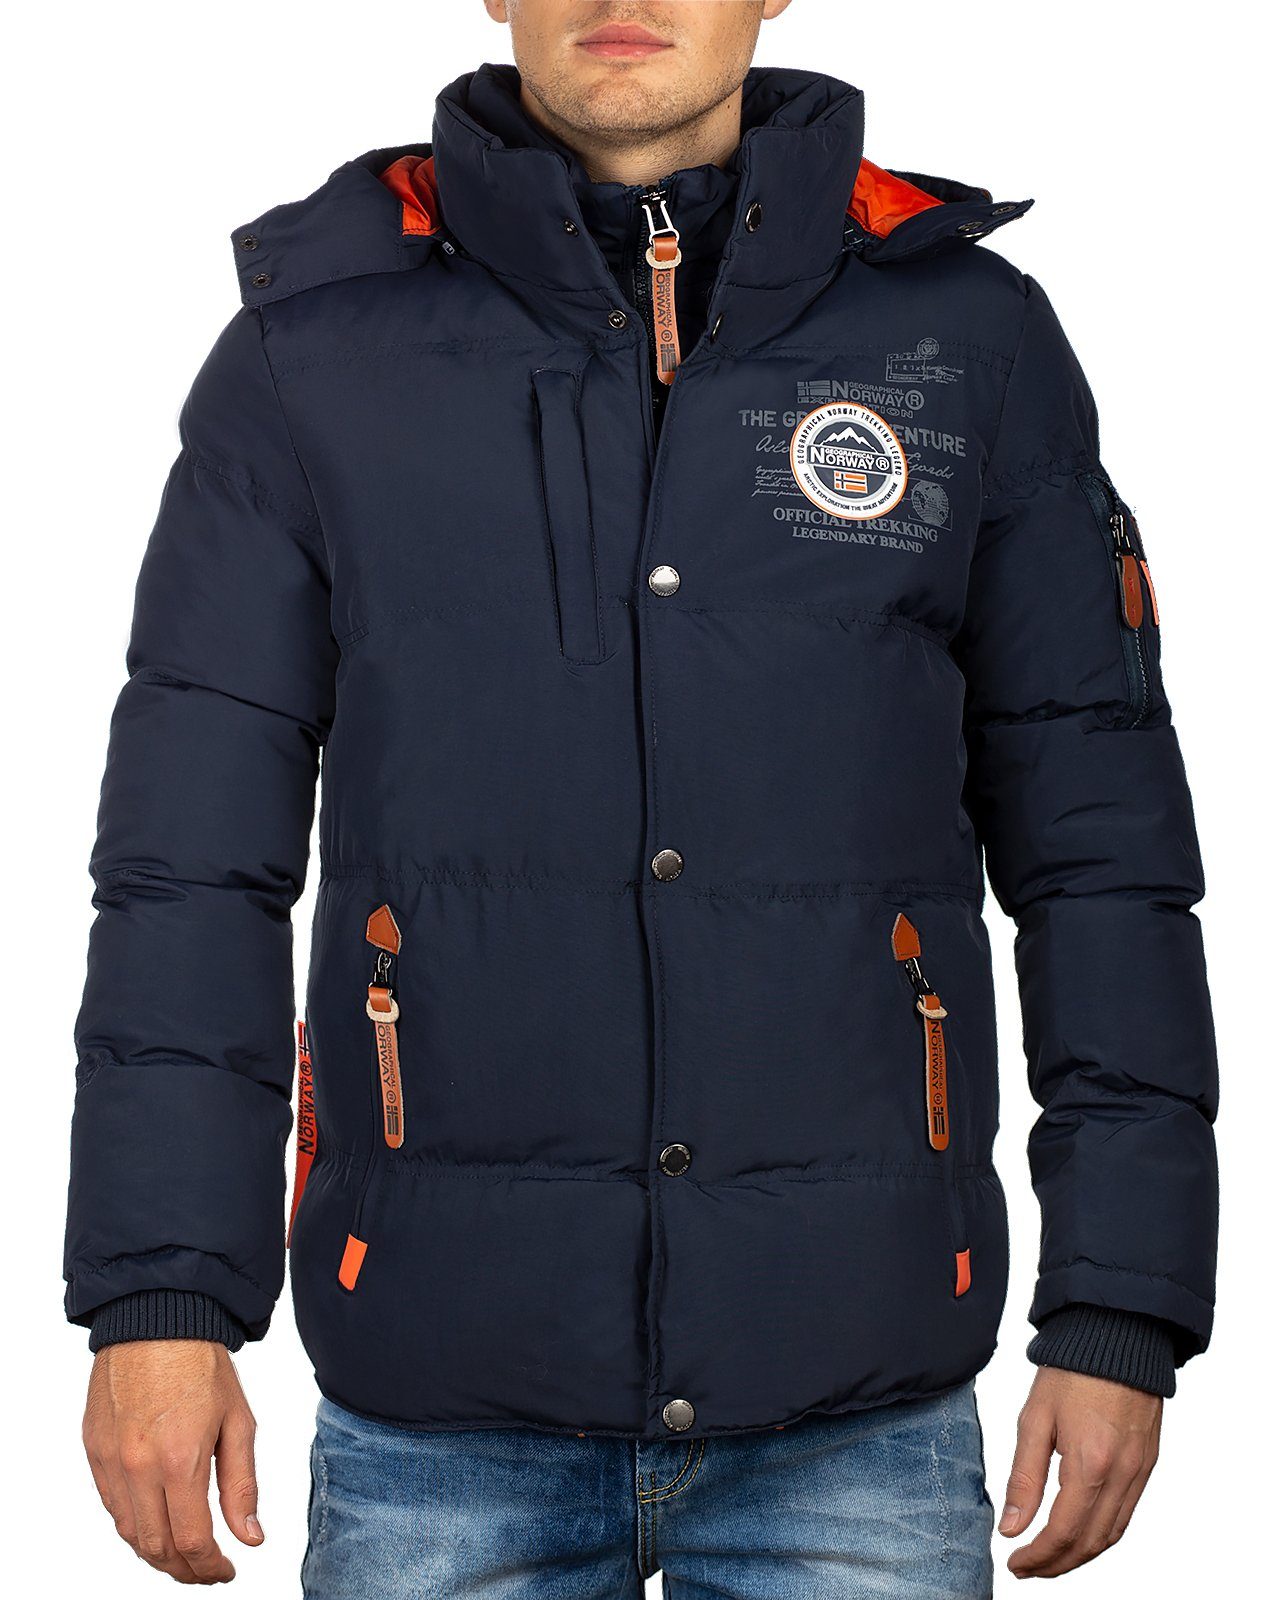 Geographical Norway Winterjacke »Geographical Norway Herren Winterjacke  baverveine« (1-St) Winterjacke mit Kapuze online kaufen | OTTO